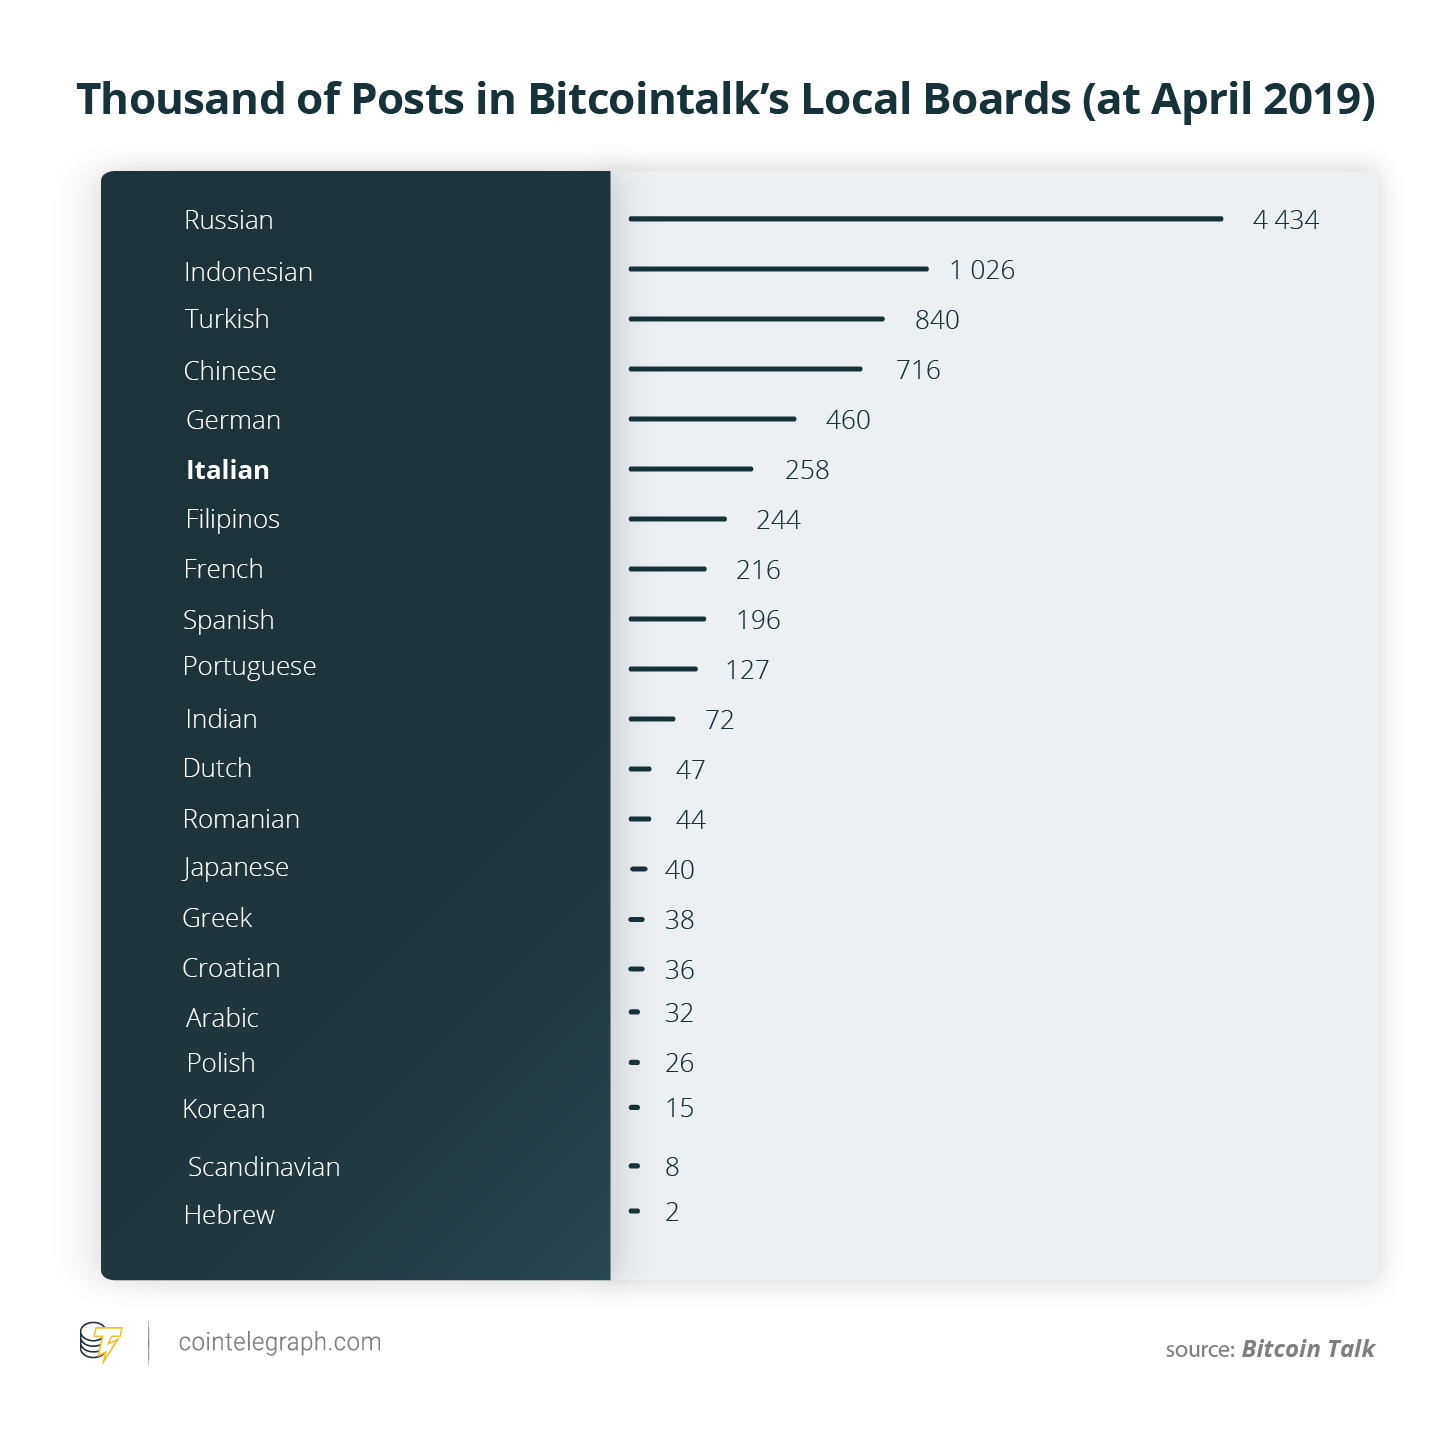 Thousand of Posts in Bitcointalk’s Local Boards (at April 2019)